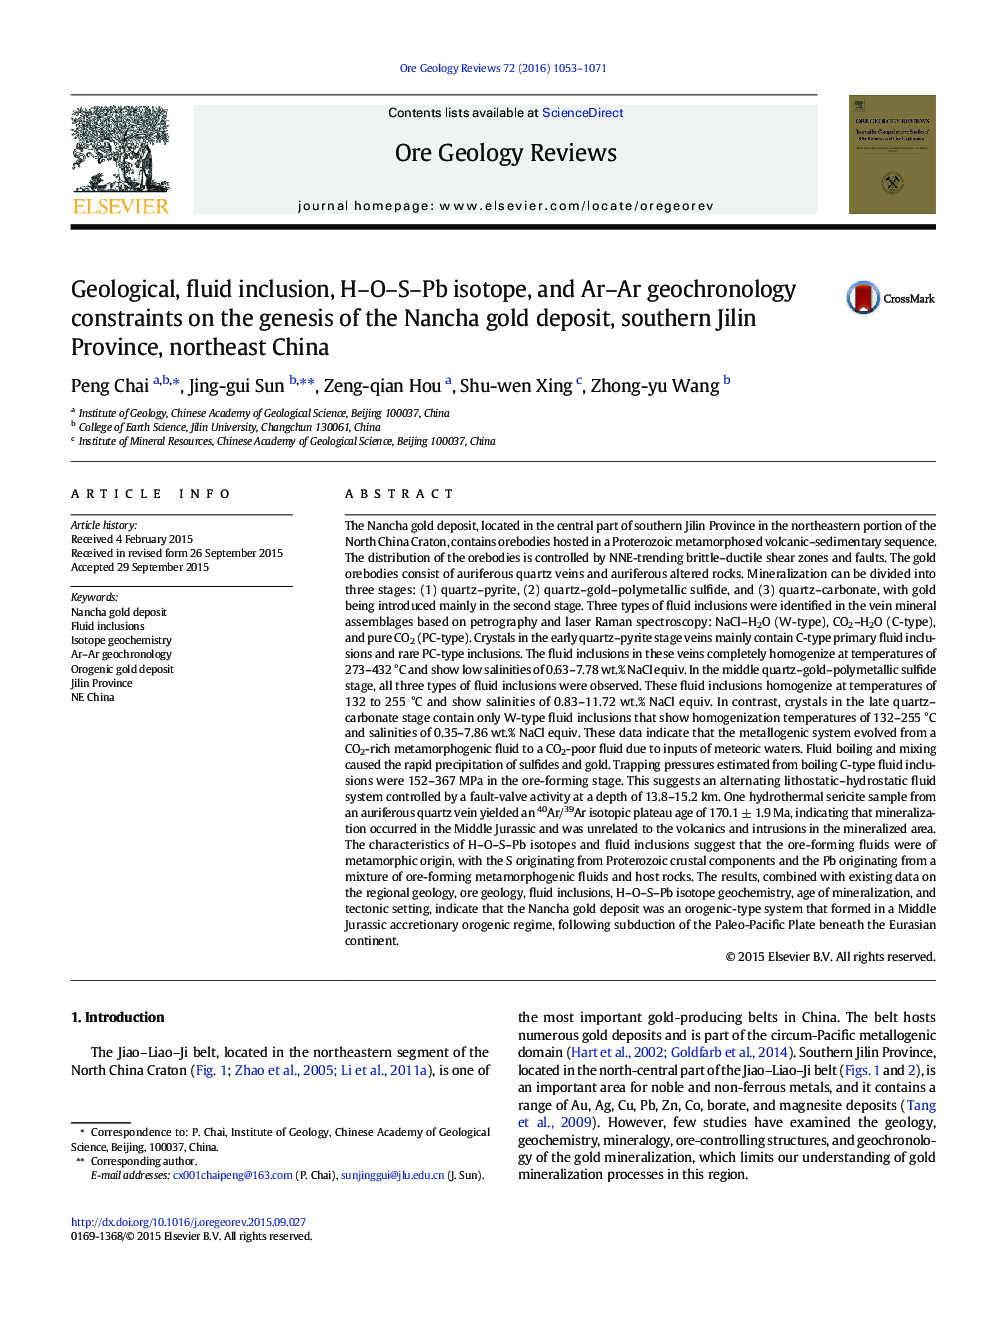 Geological, fluid inclusion, H-O-S-Pb isotope, and Ar-Ar geochronology constraints on the genesis of the Nancha gold deposit, southern Jilin Province, northeast China